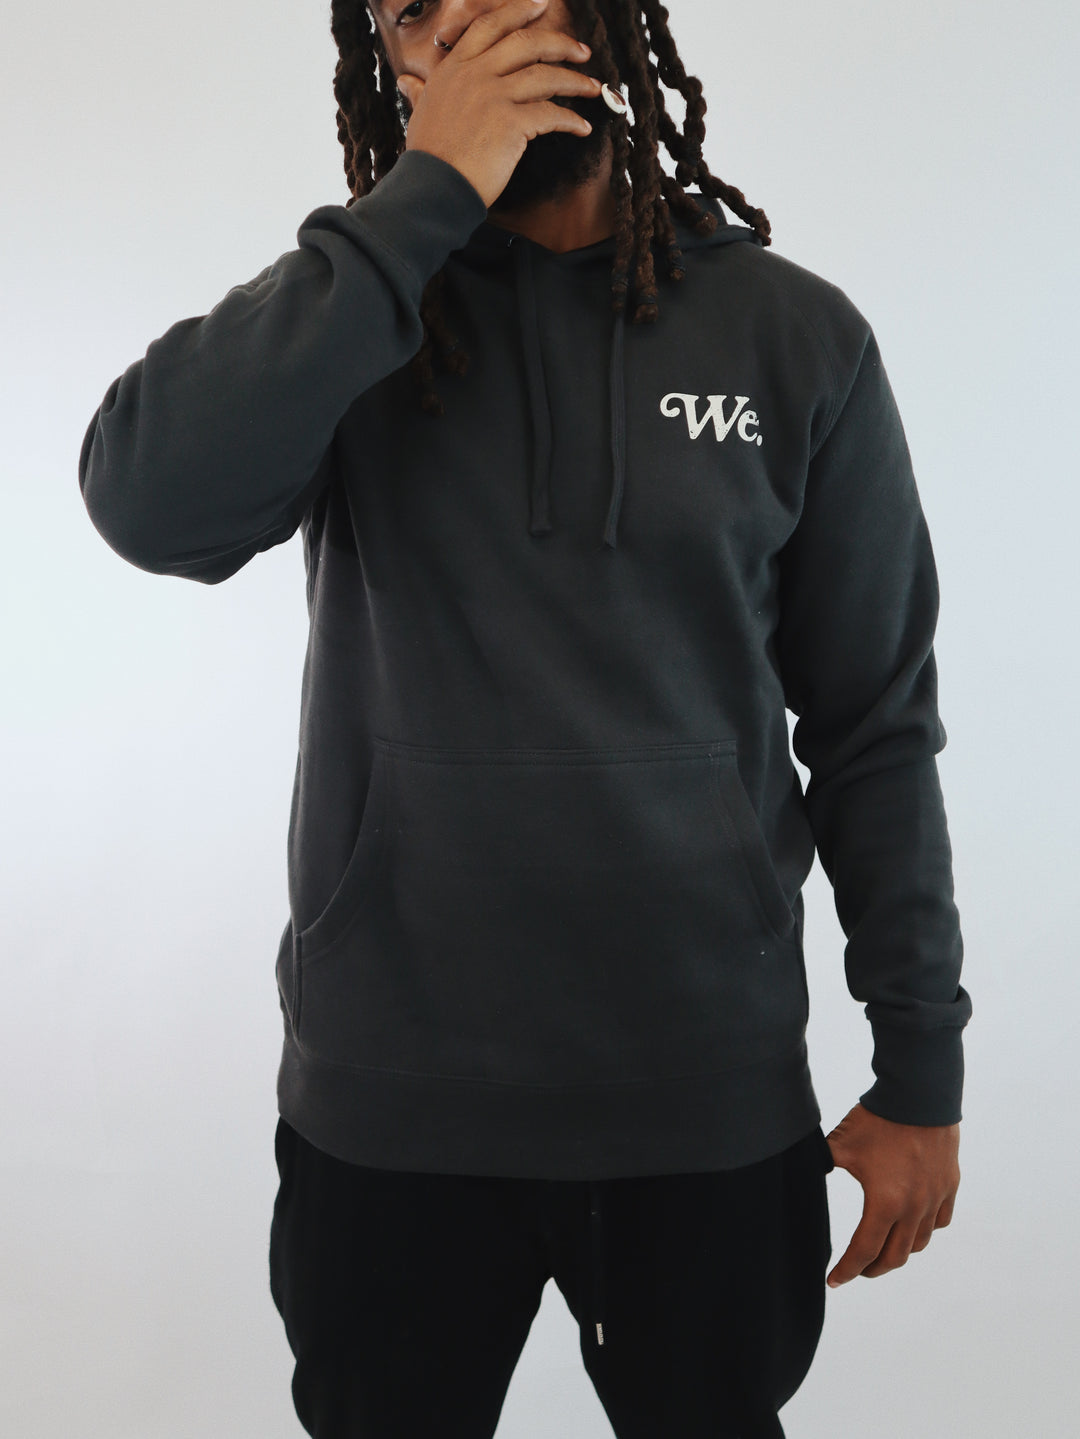 We. Are The Ones - Charcoal Premium Hoodie